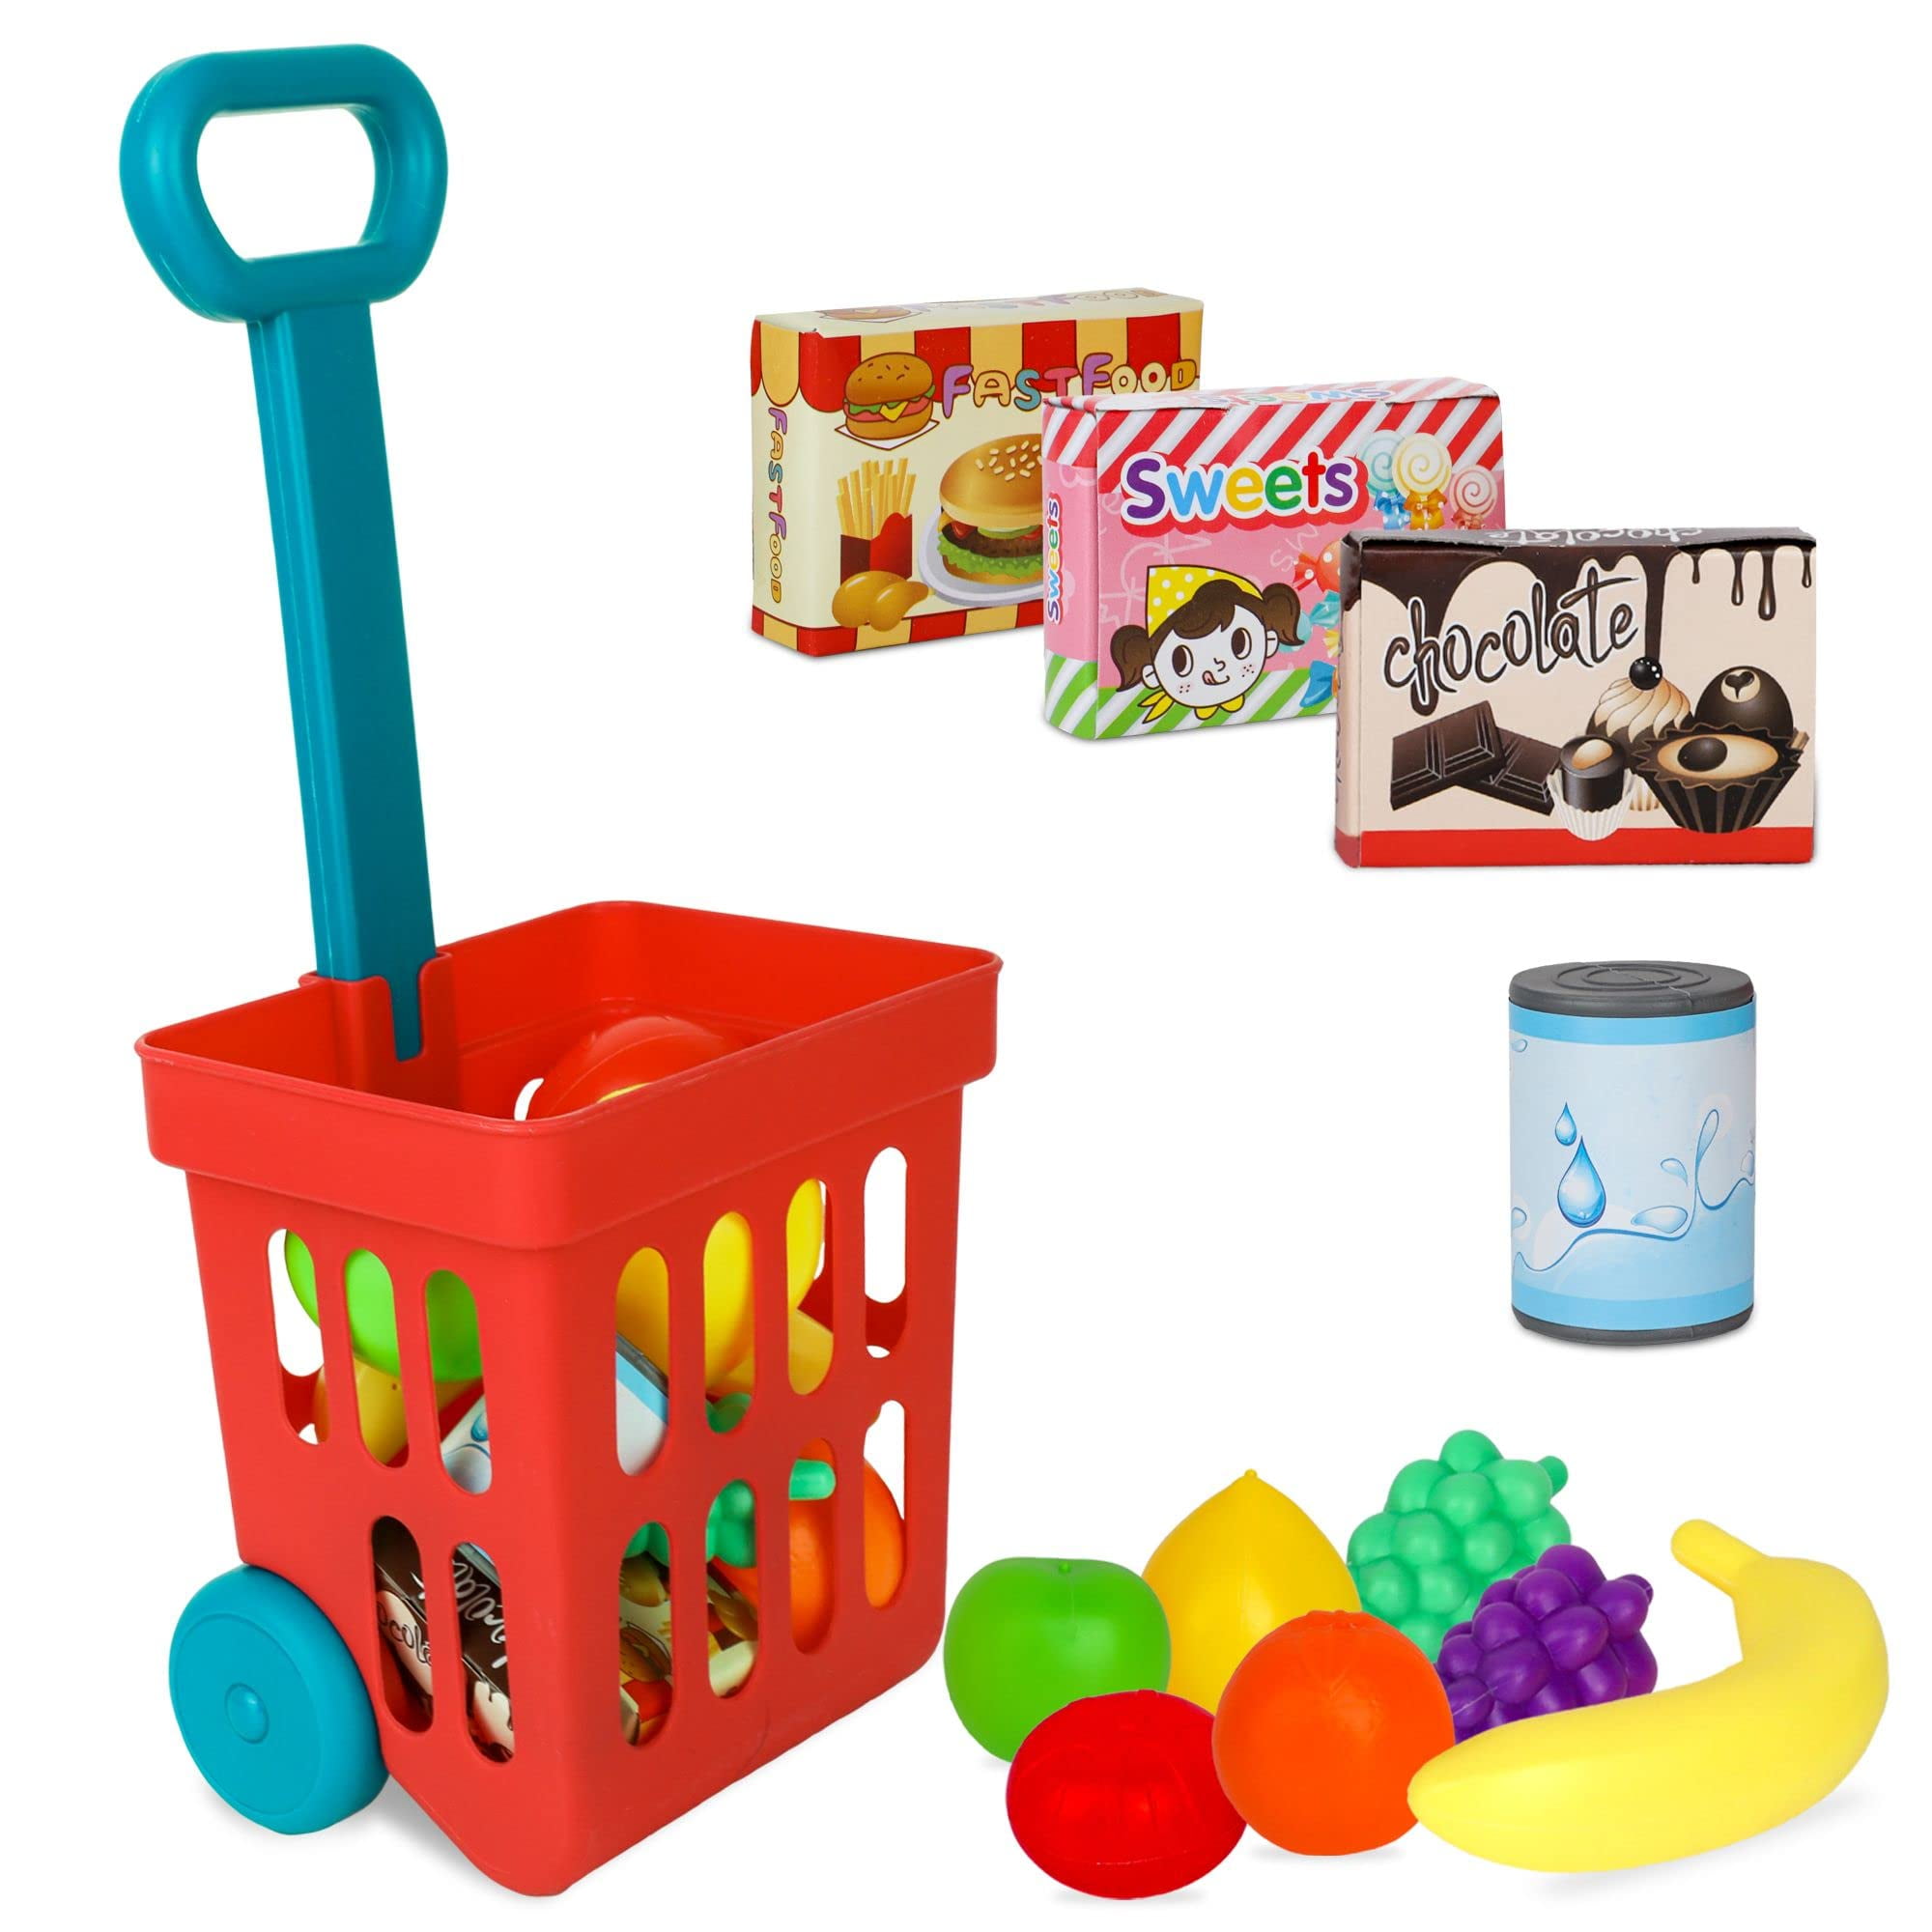 Pretend Play Battat Grocery Shopping Cart Toy For Toddlers 23 Pieces 